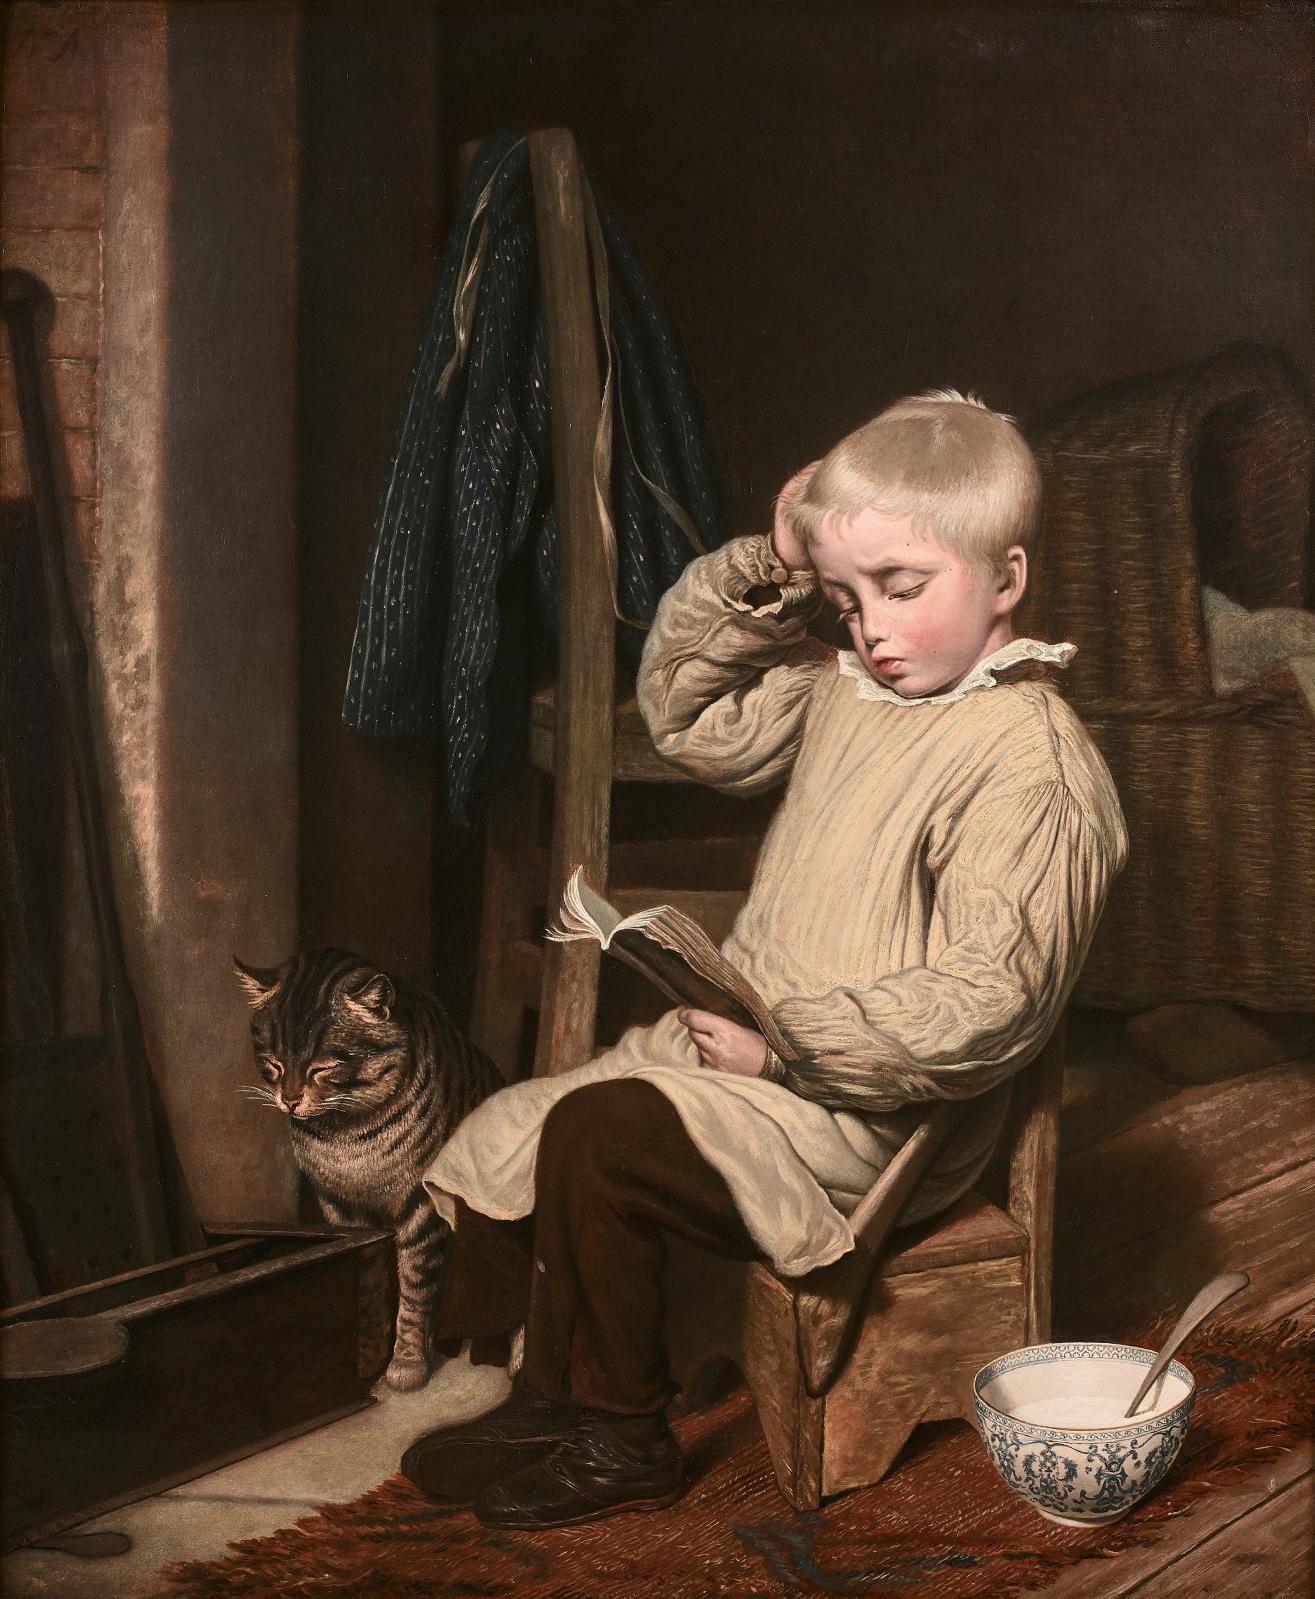 Jacques-Laurent Agasse and the Challenges of Youth